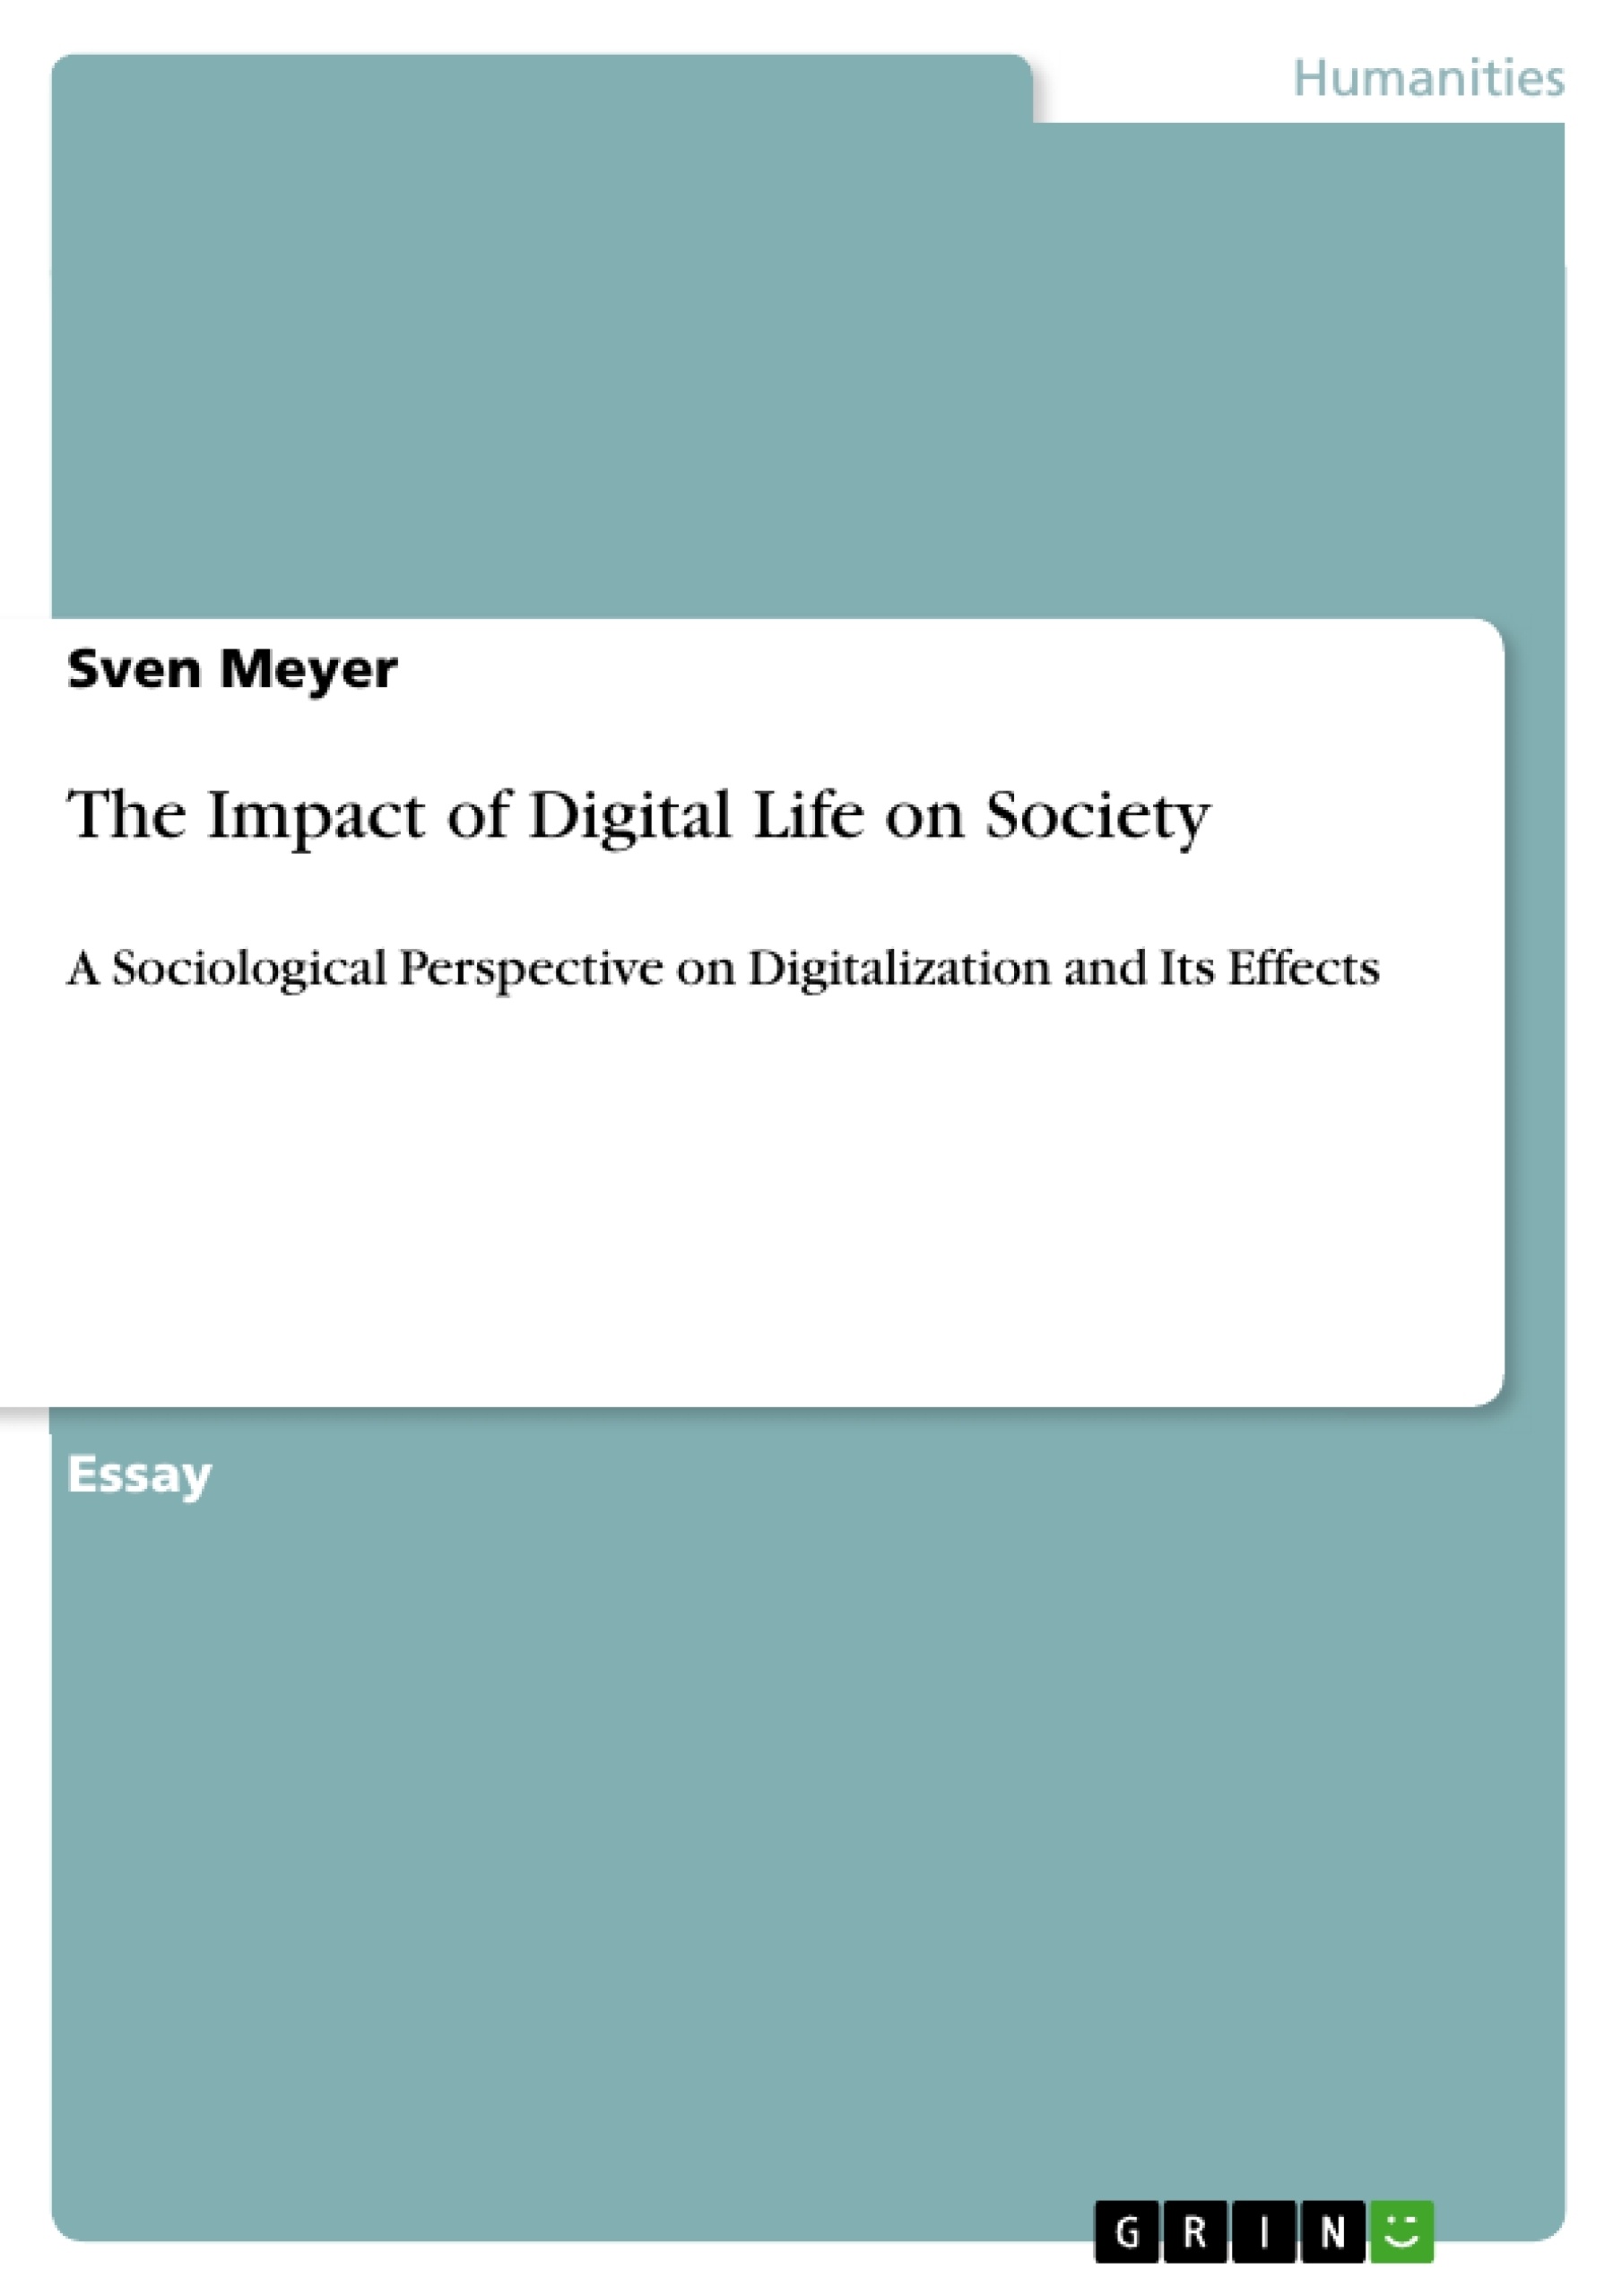 Title: The Impact of Digital Life on Society